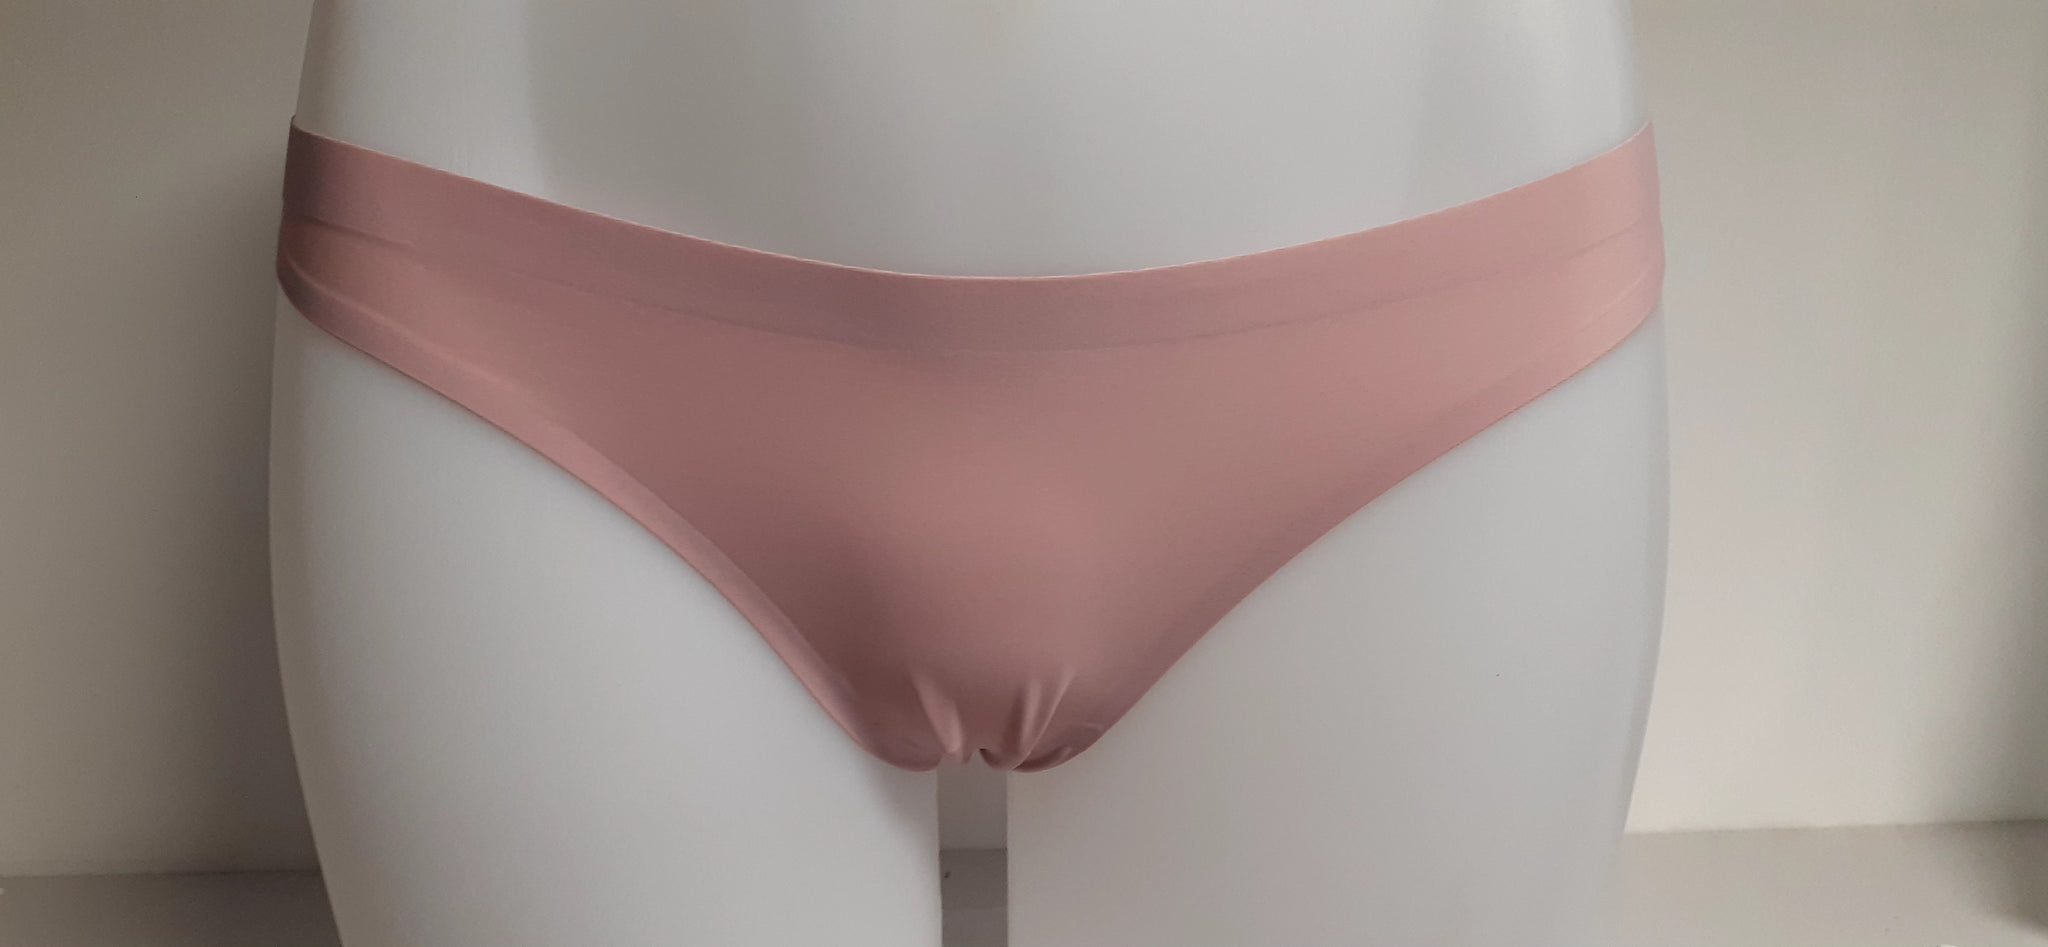 Comfort Seamless Thong no show G string – Jack&Joan's lingerie